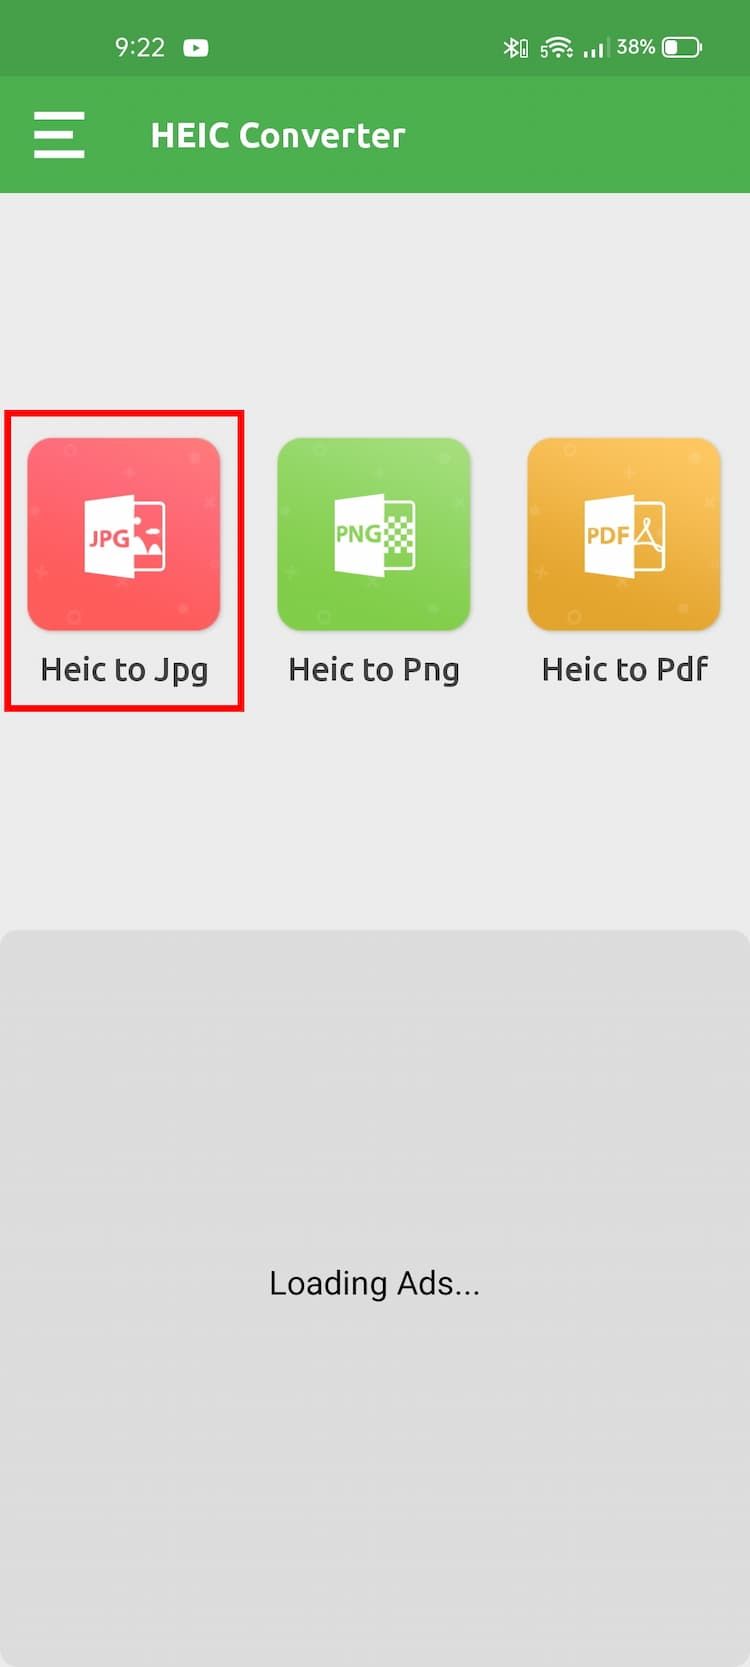 HEIC Converter Android App Home